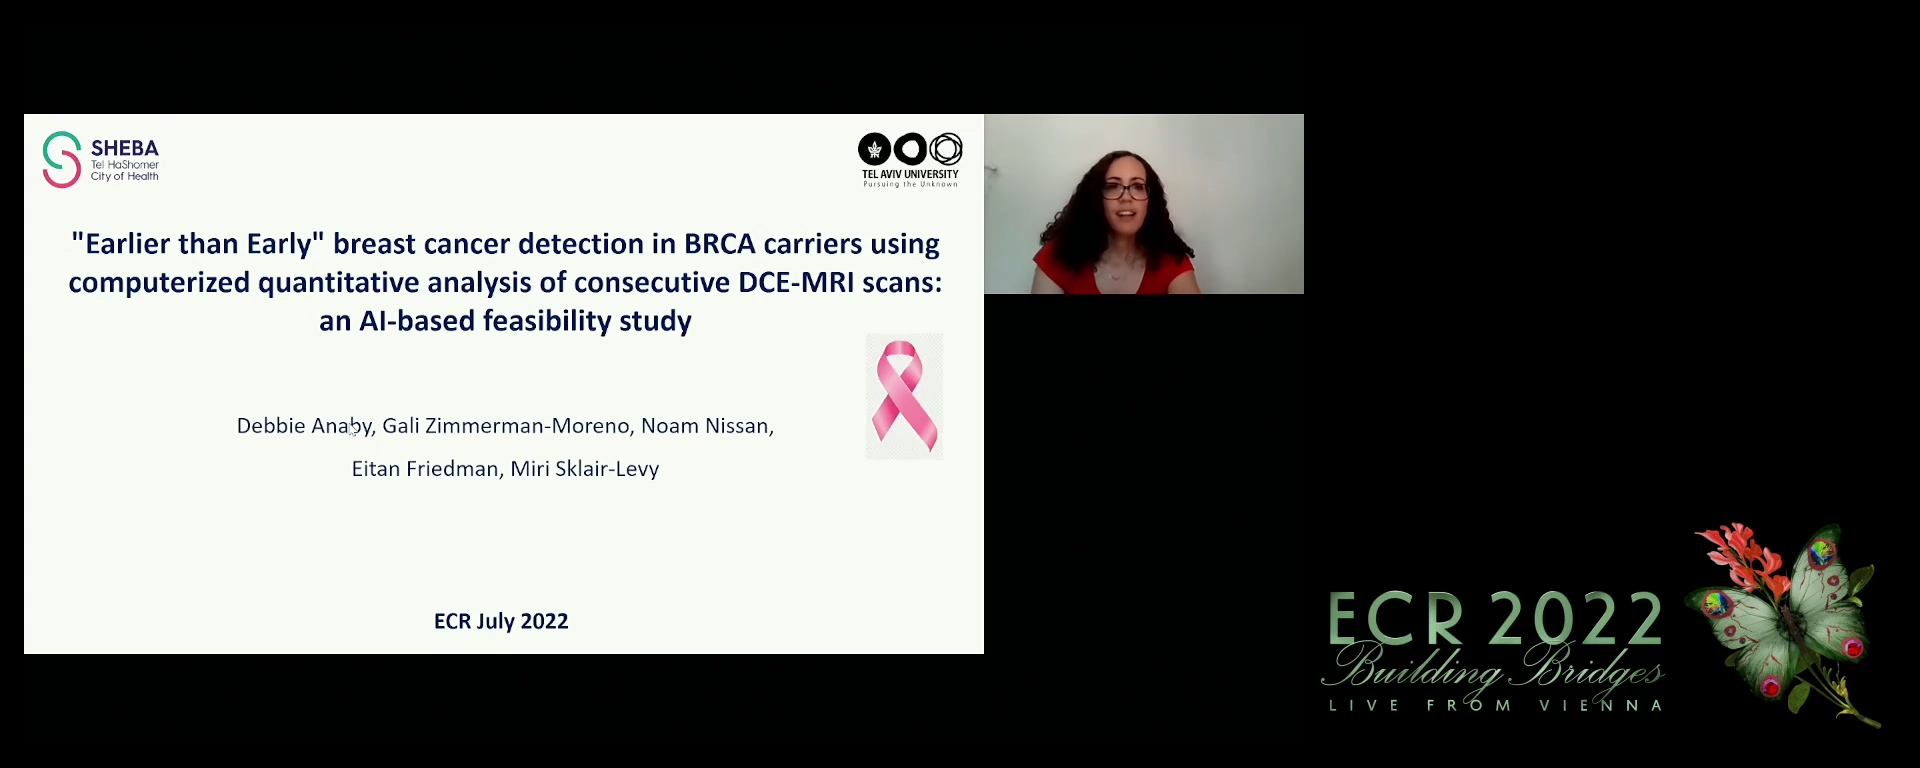 "Earlier than Early" breast cancer detection in BRCA carriers using computerised quantitative analysis of consecutive DCE-MRI scans: an AI-based feasibility study